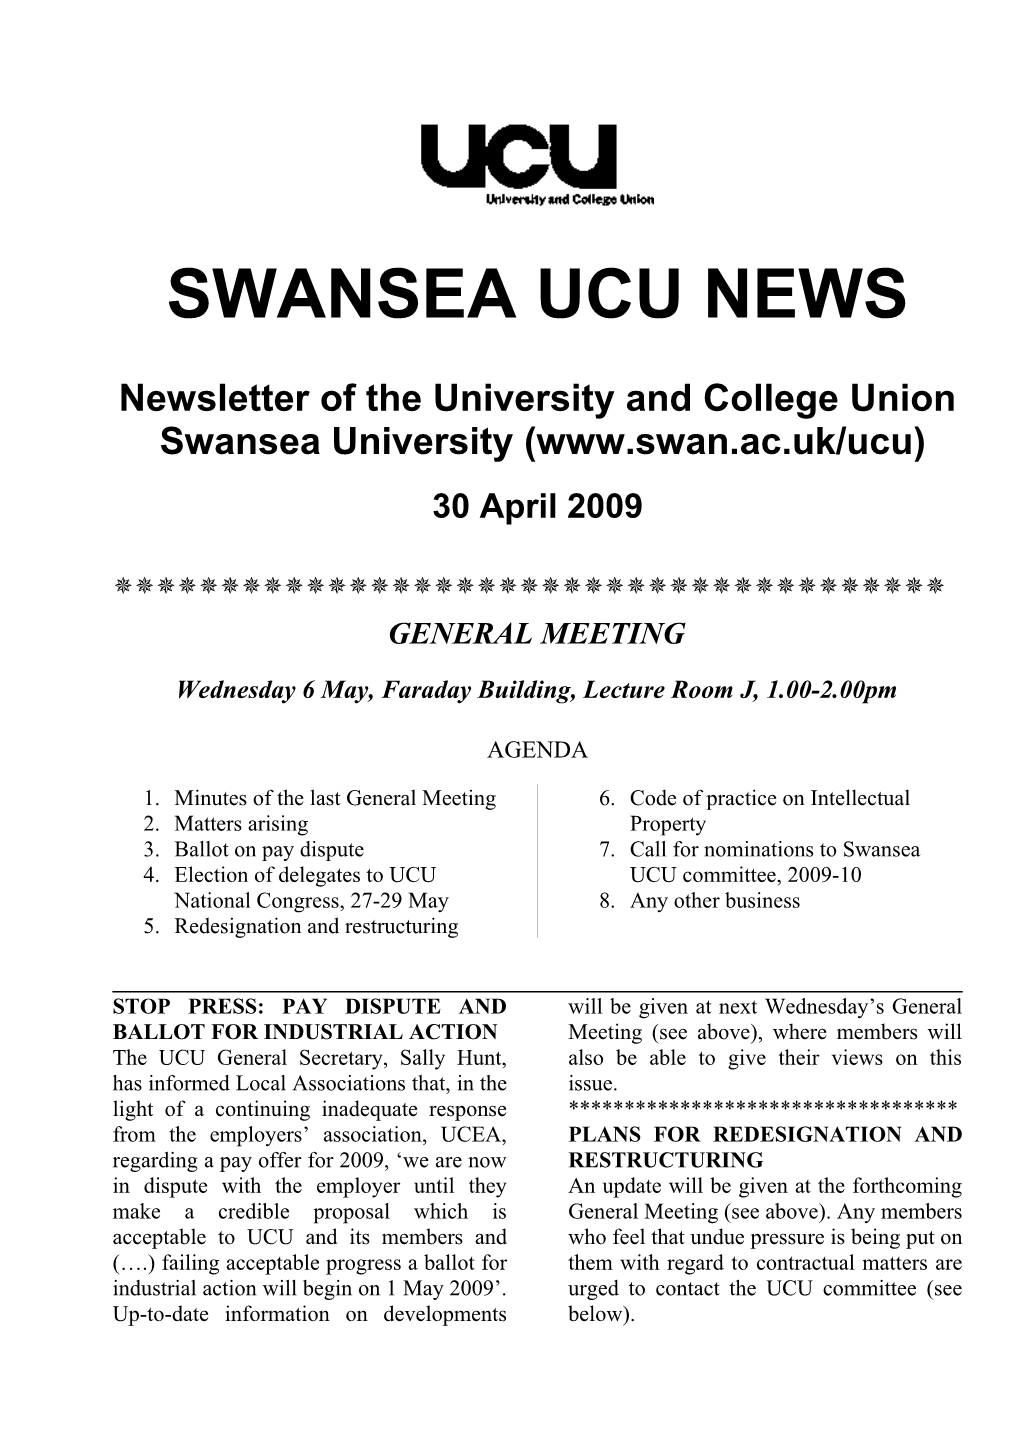 Newsletter of the University and College Union